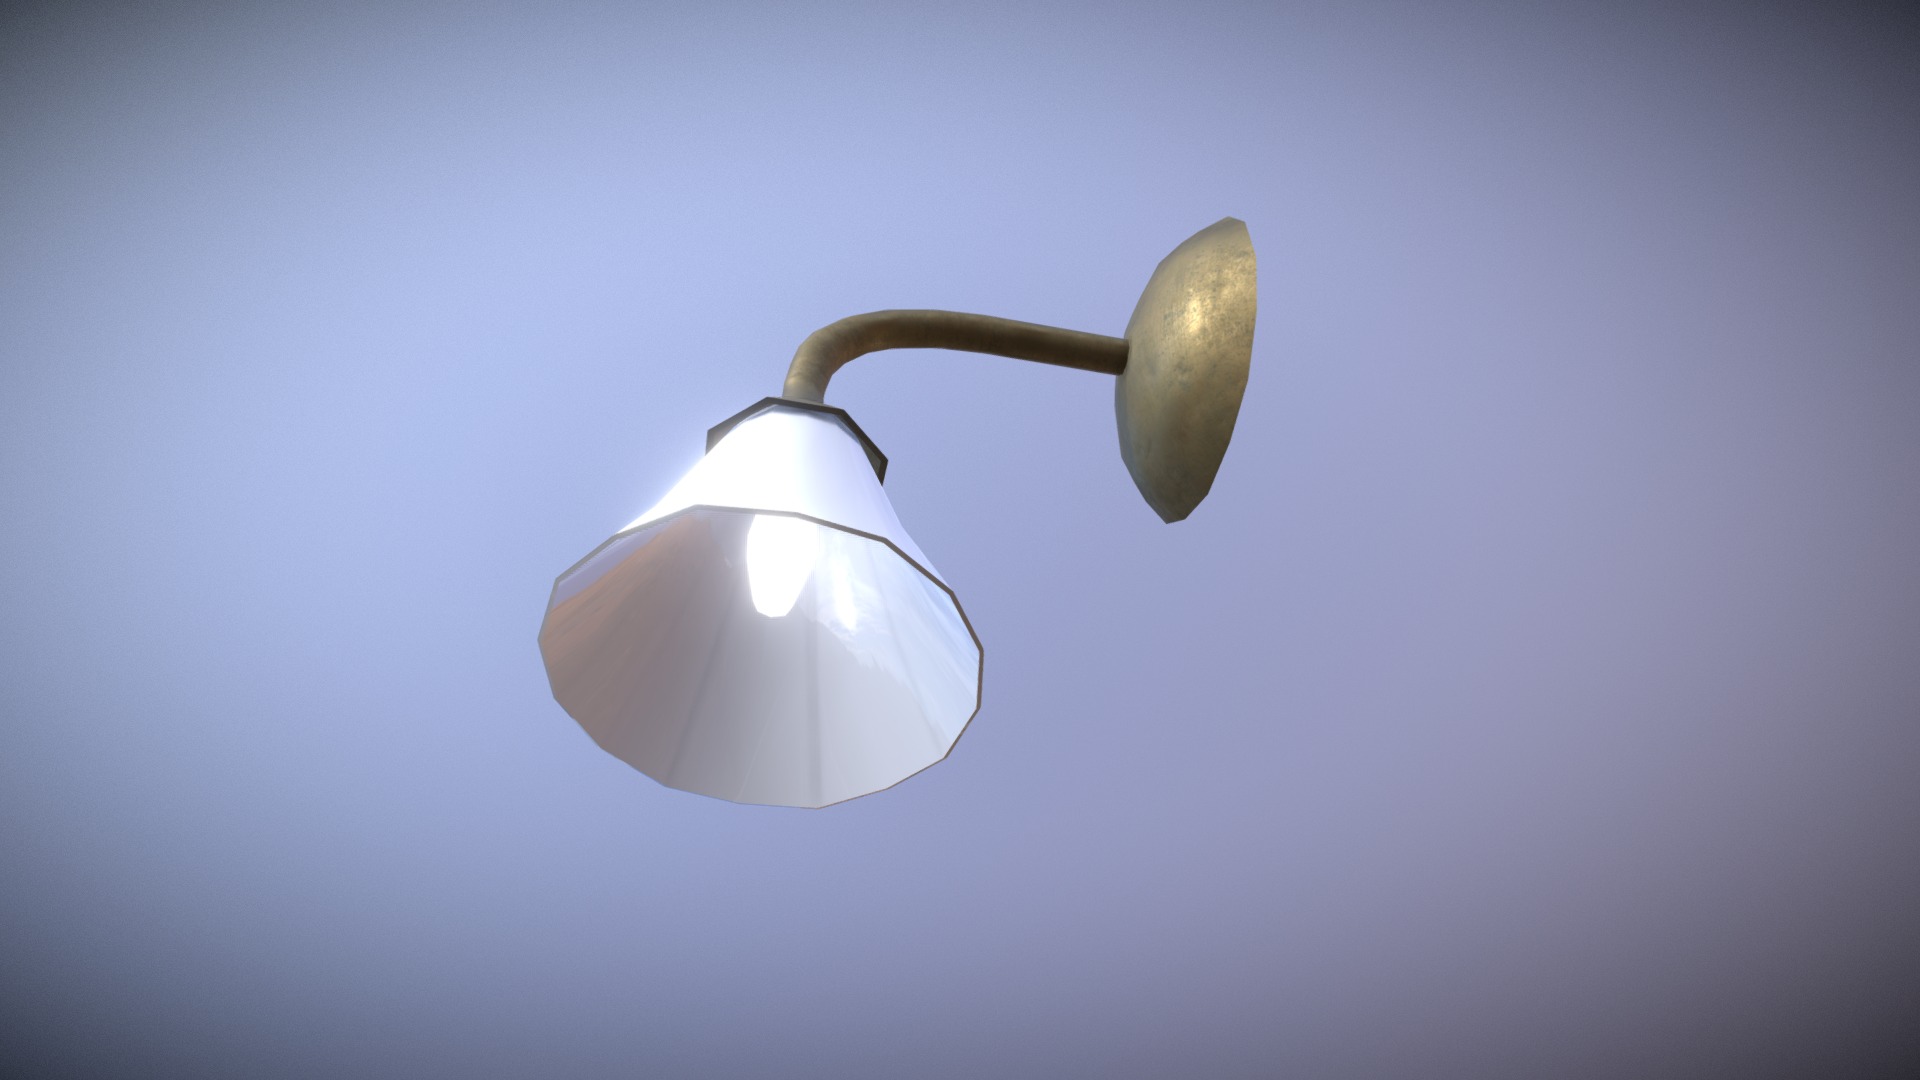 3D model Game Ready Wall Lamp Low Poly - This is a 3D model of the Game Ready Wall Lamp Low Poly. The 3D model is about a light fixture from a ceiling.